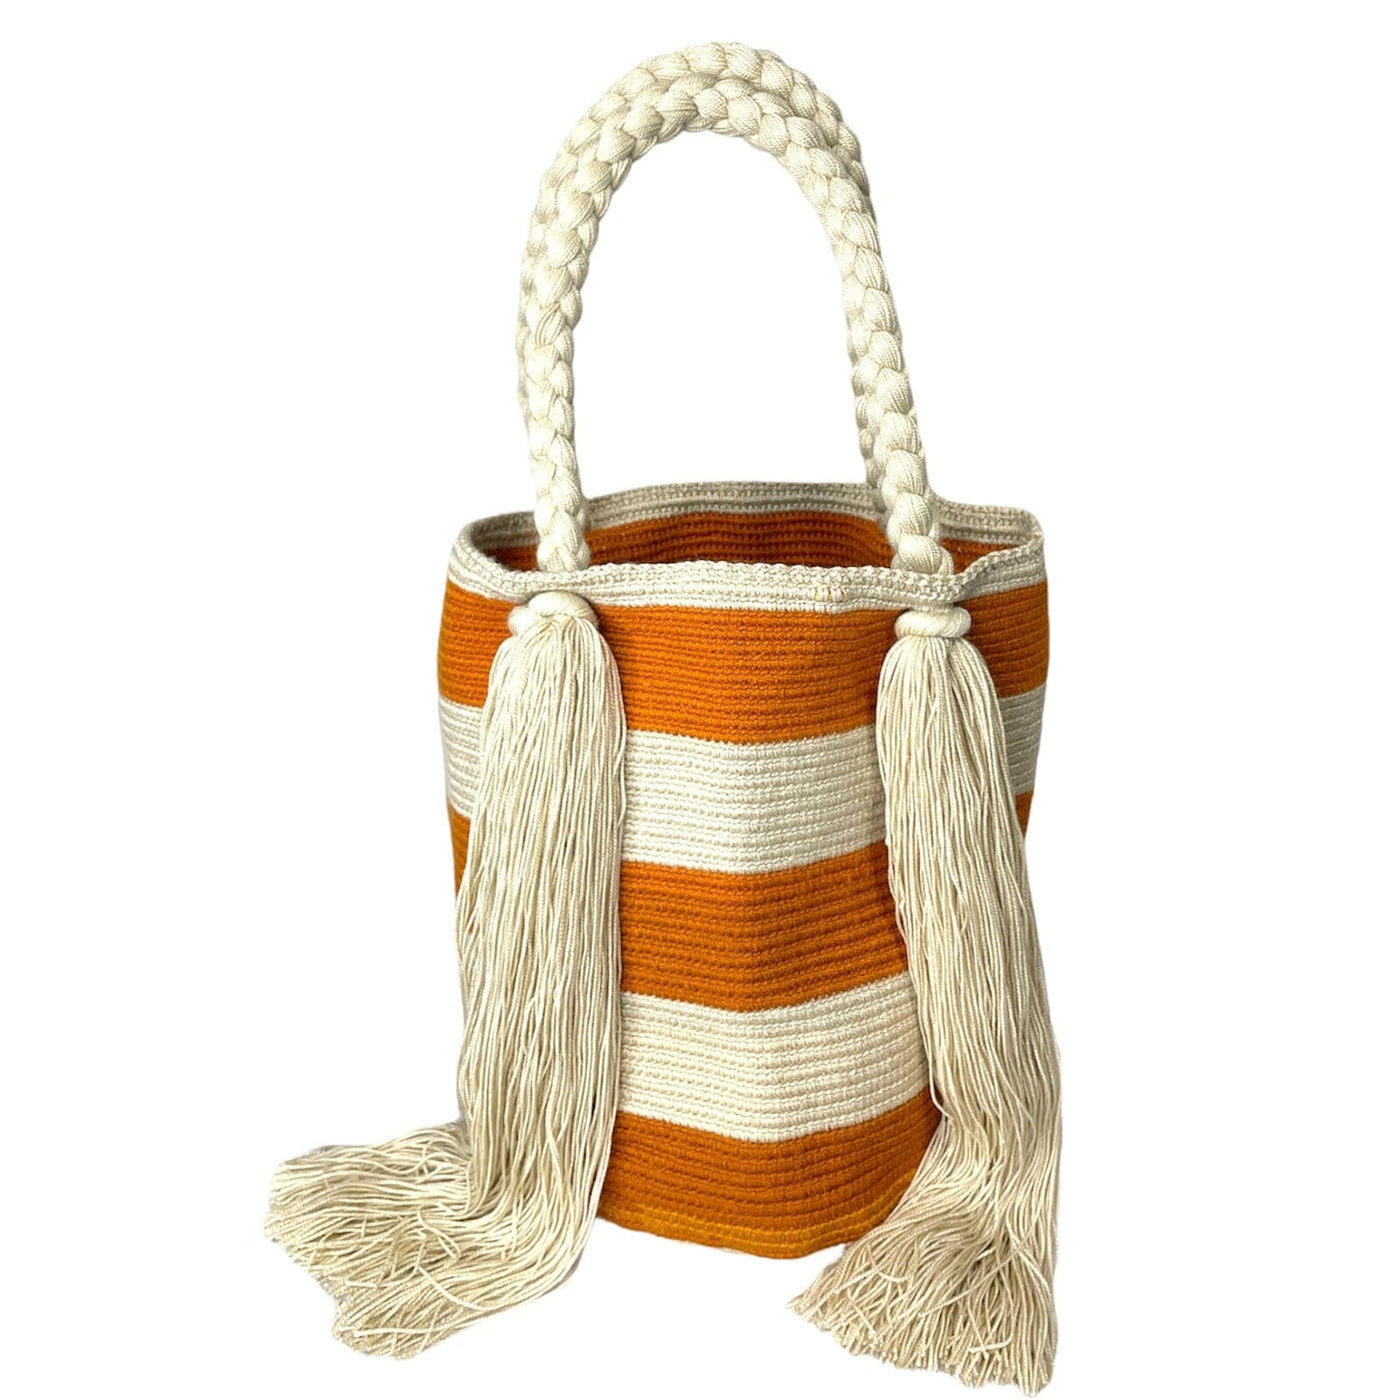 Summer and Fall Striped Tote Bag | Striped Shoulder Bag | Crochet Purse with Tassels